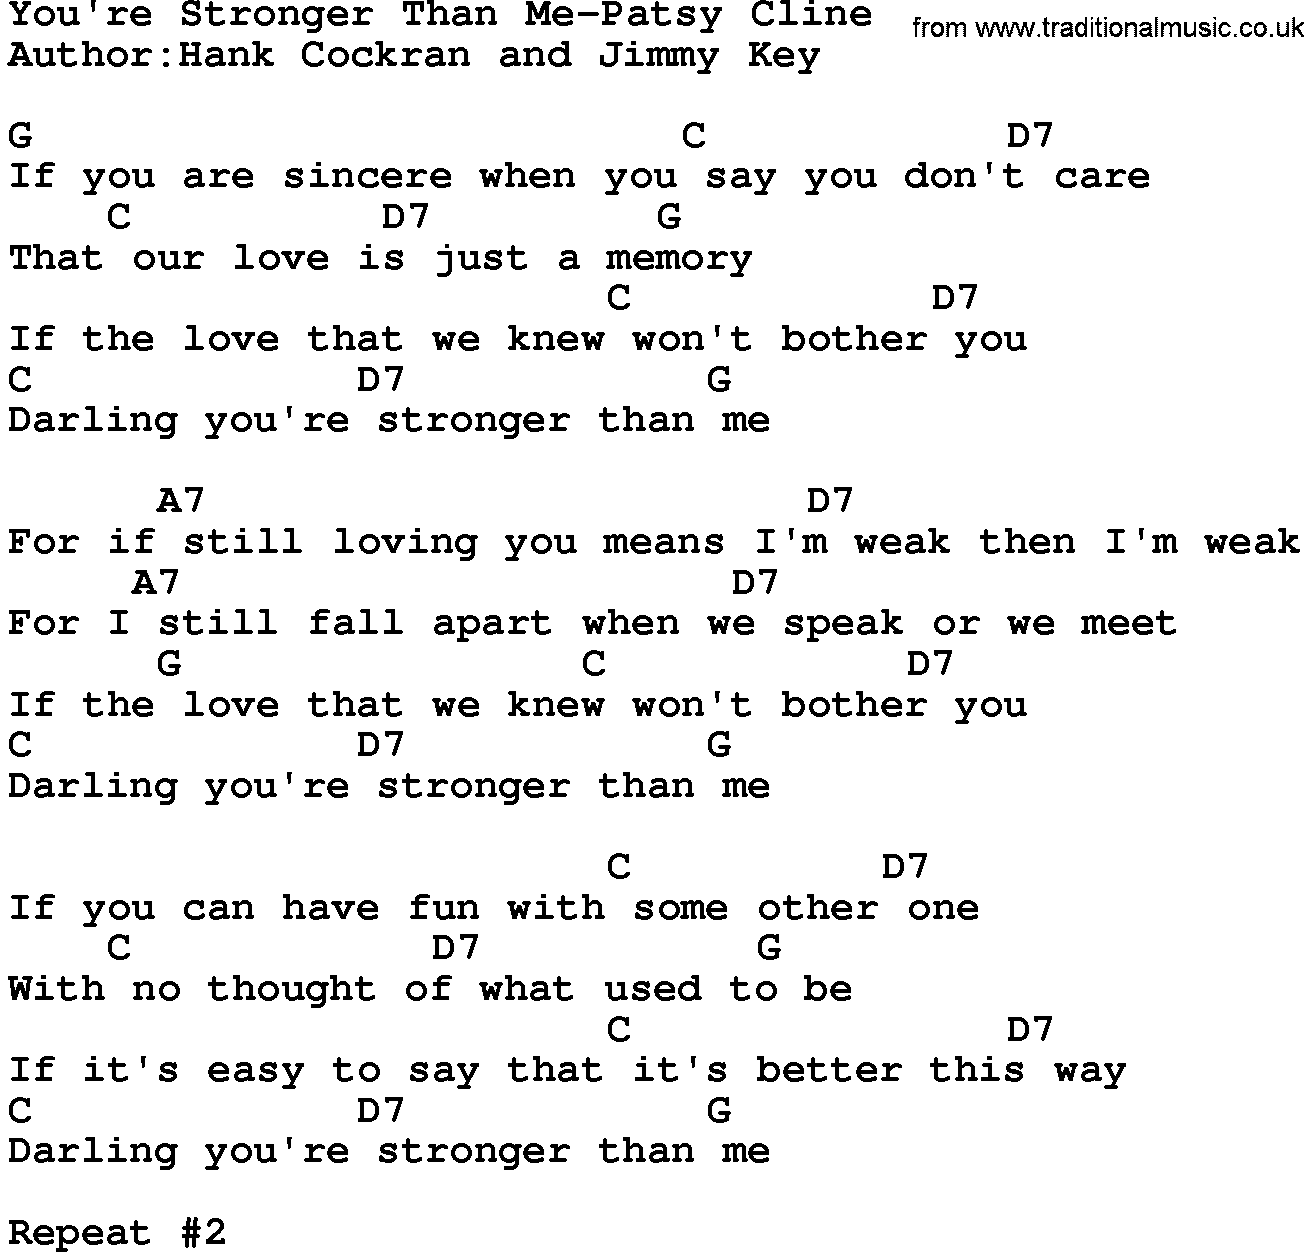 Country music song: You're Stronger Than Me-Patsy Cline lyrics and chords